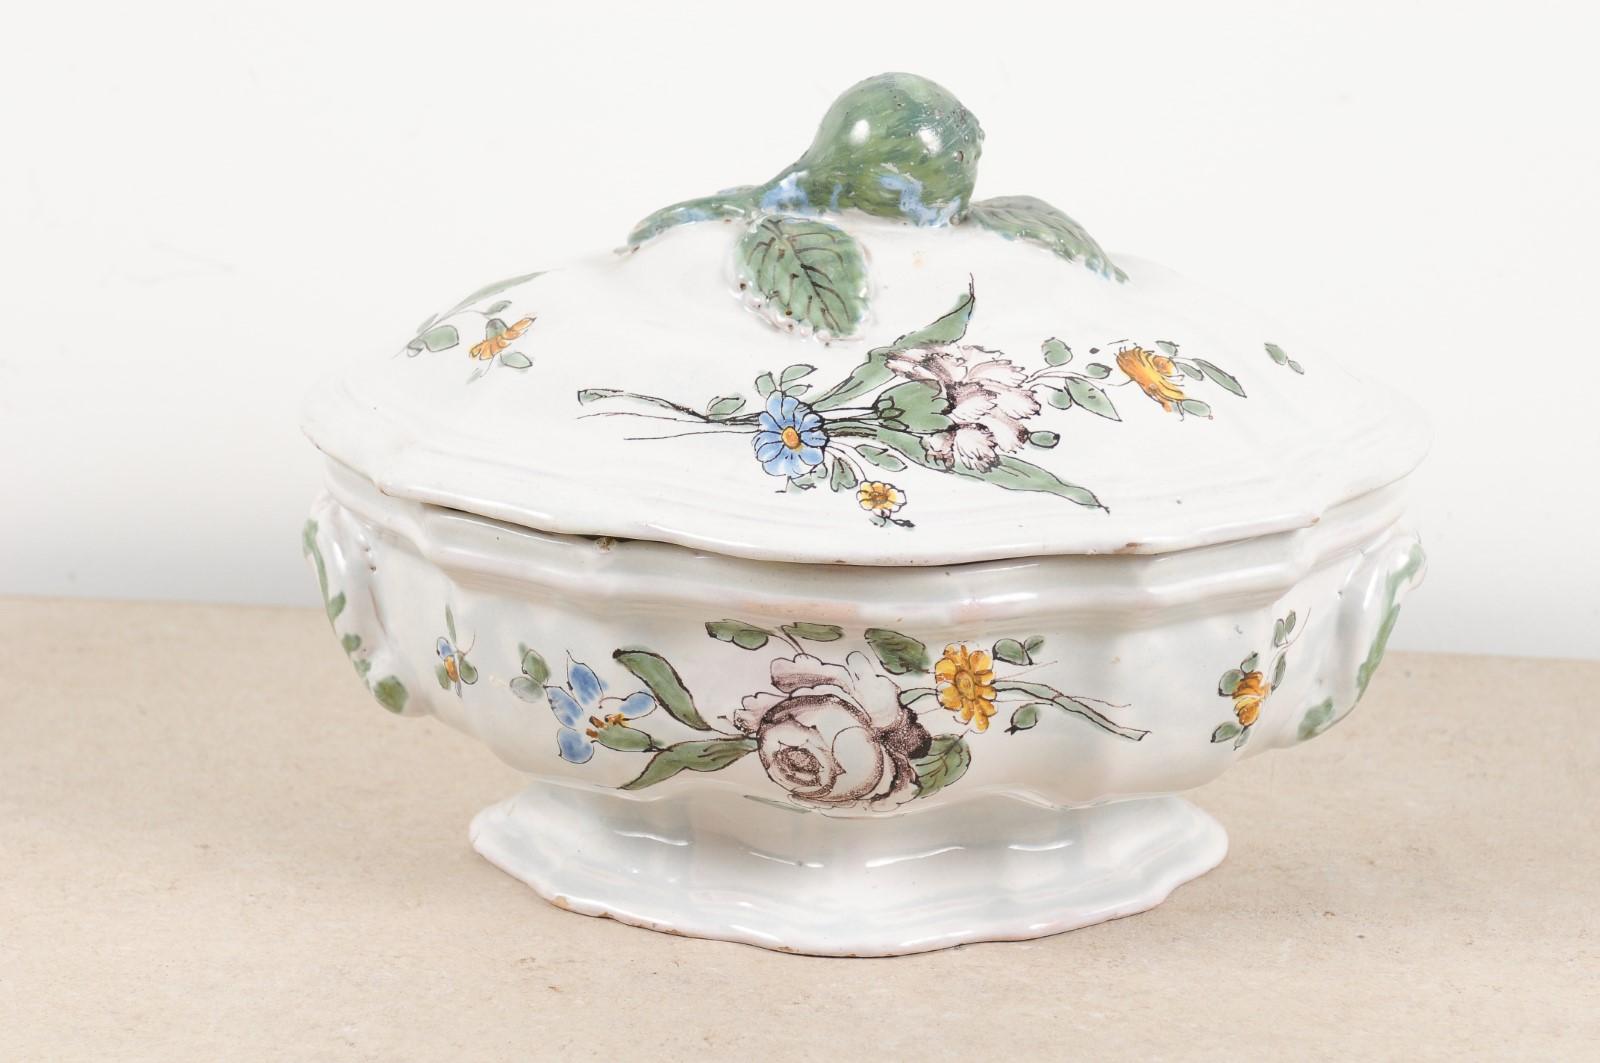 French 1750s Faience Oval Shaped Soup Tureen from Bordeaux with Floral Decor For Sale 1